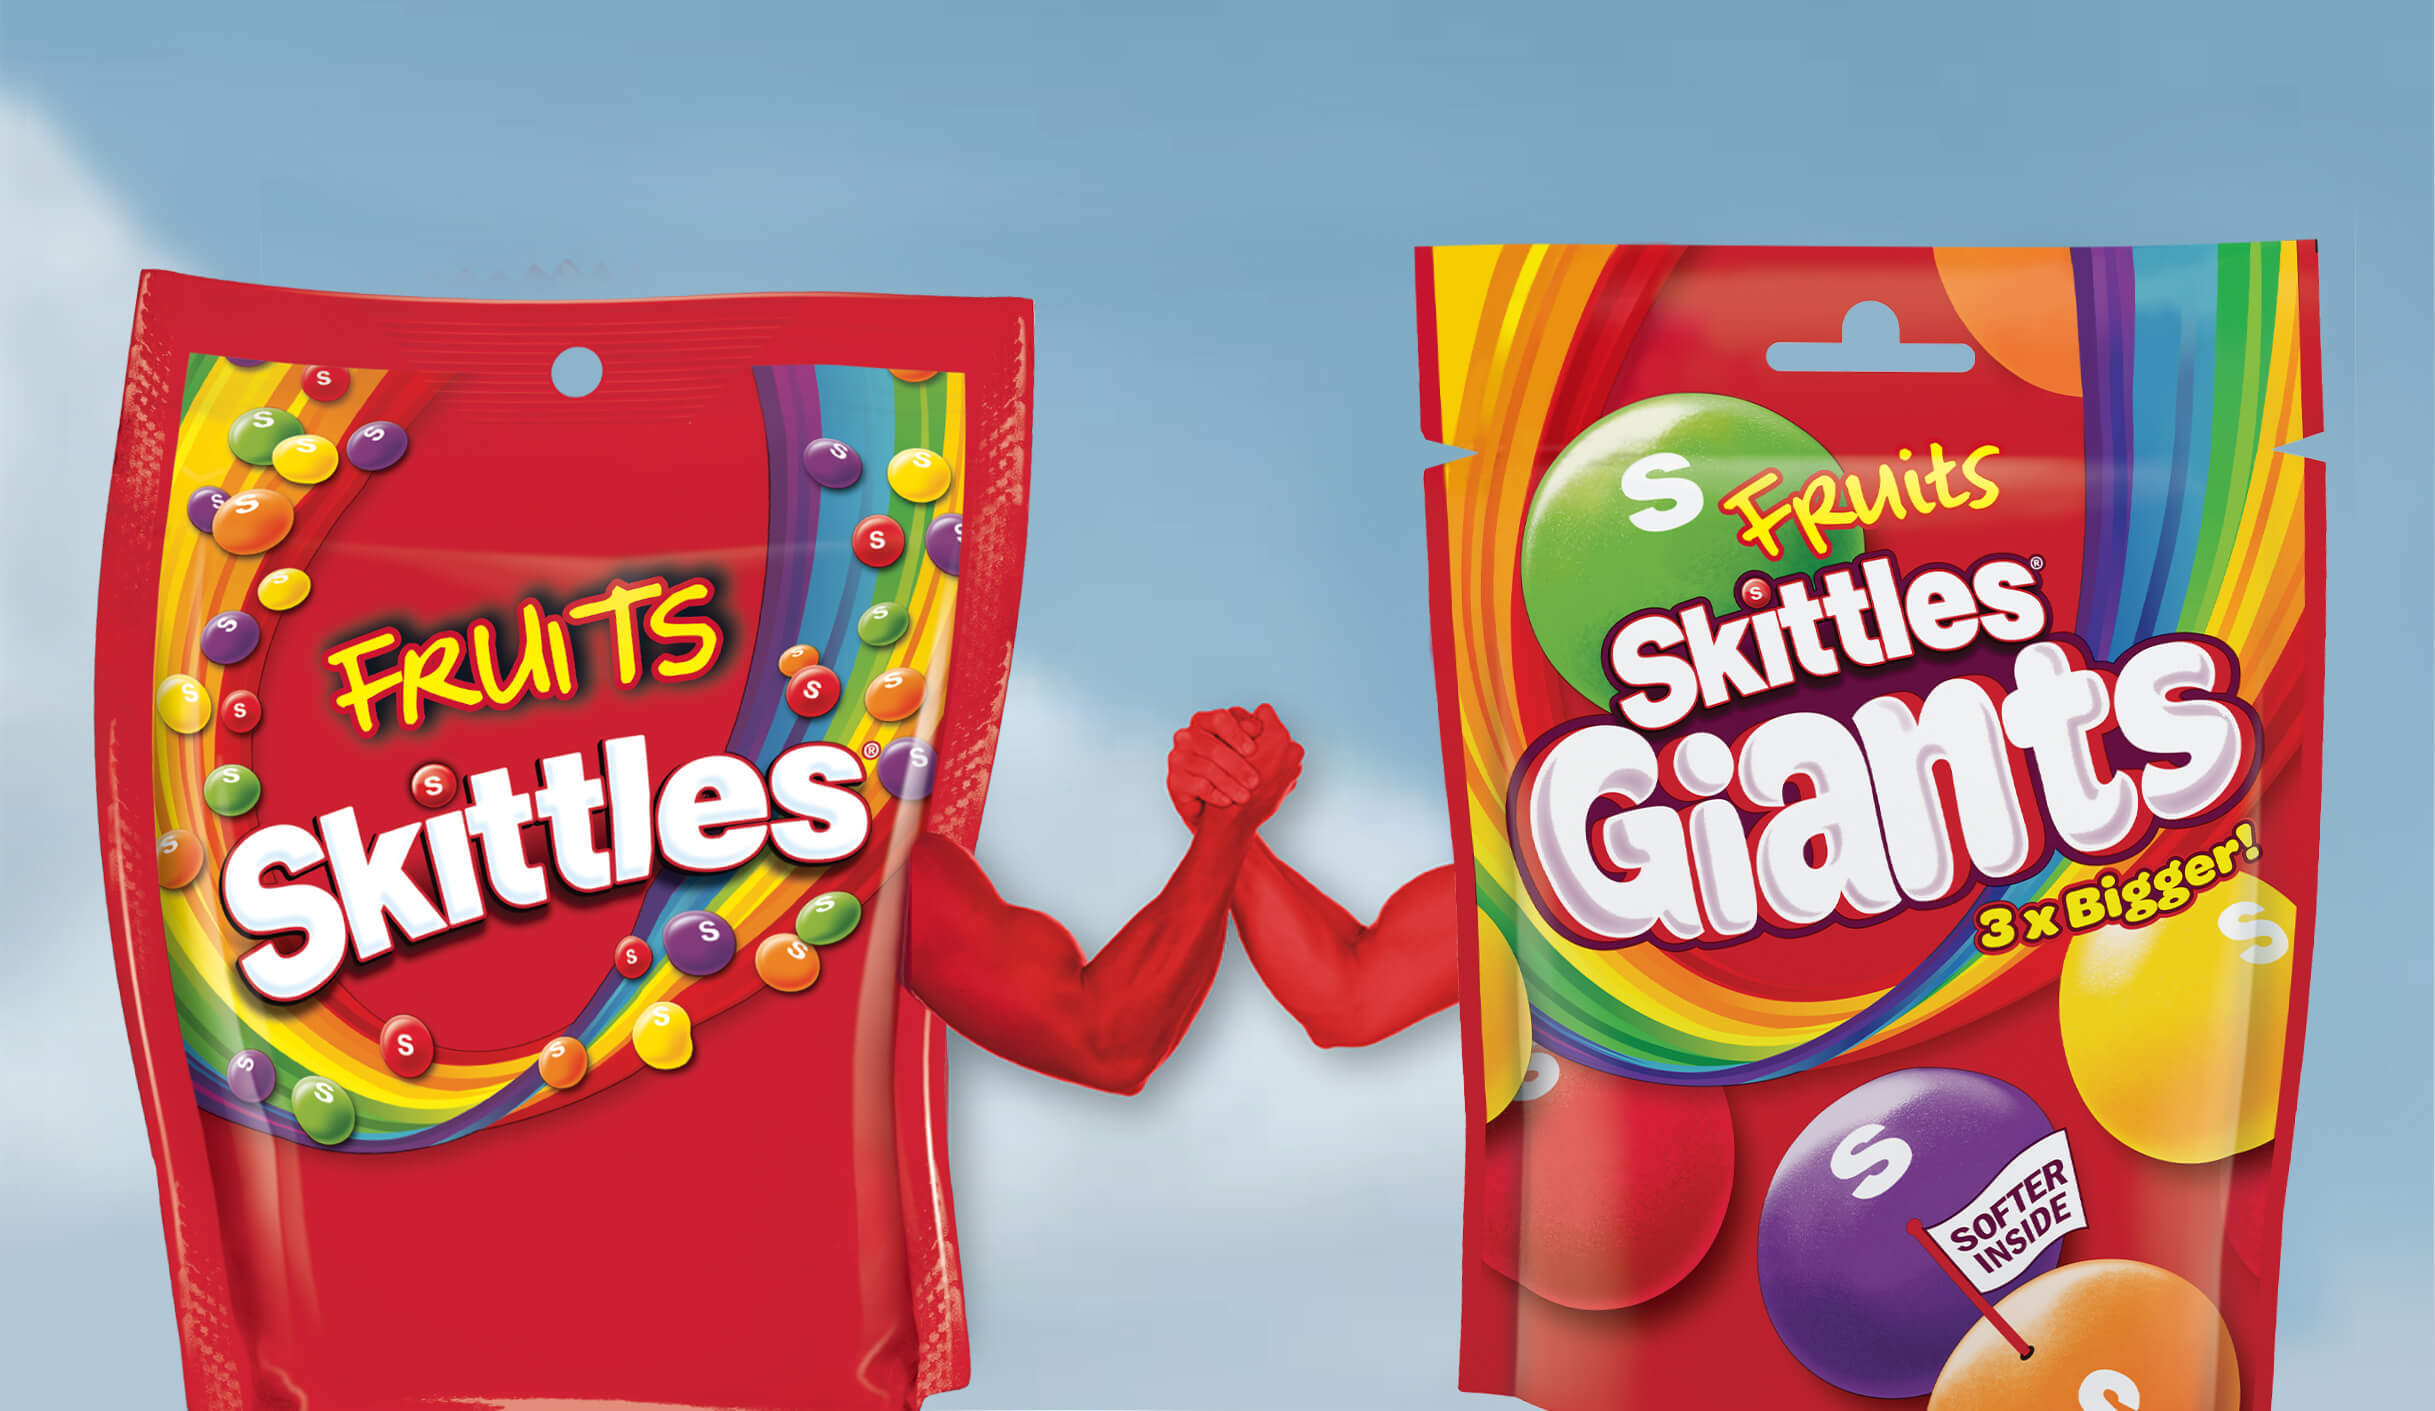 Skittles Giants and Fruits joining hands